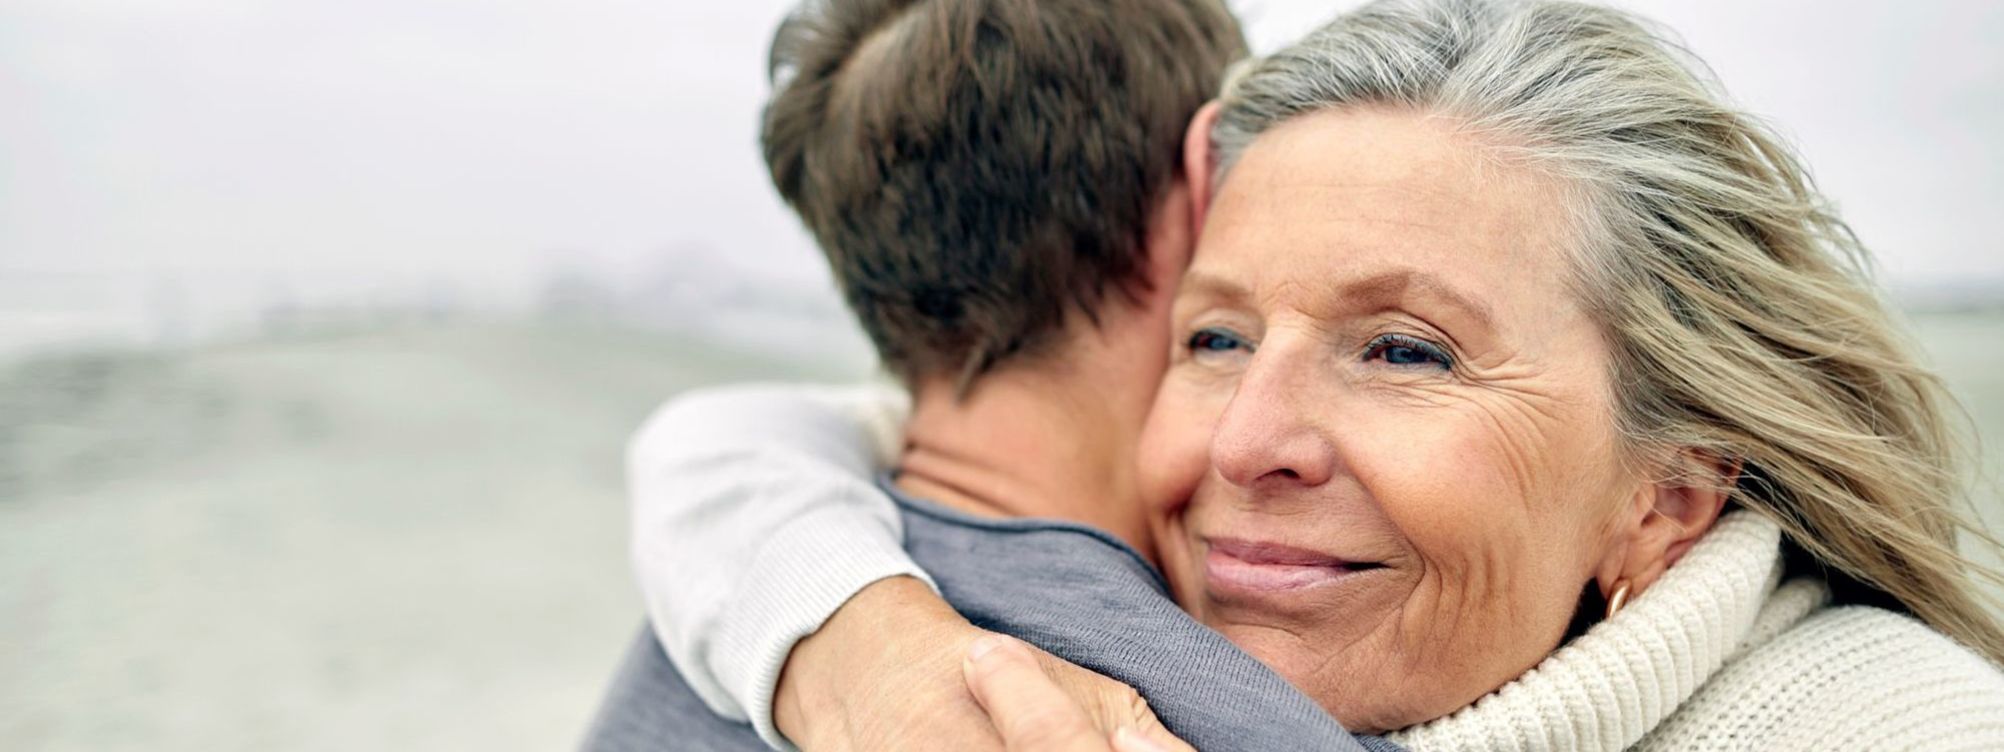 Harrington Discovery Institute Accelerates Breakthrough Science into Cancer Treatments and Cures. Harrington Advances Science to Medicine through Philanthropy. The image portrays a middle-aged woman hugging a male family member on a beach. .